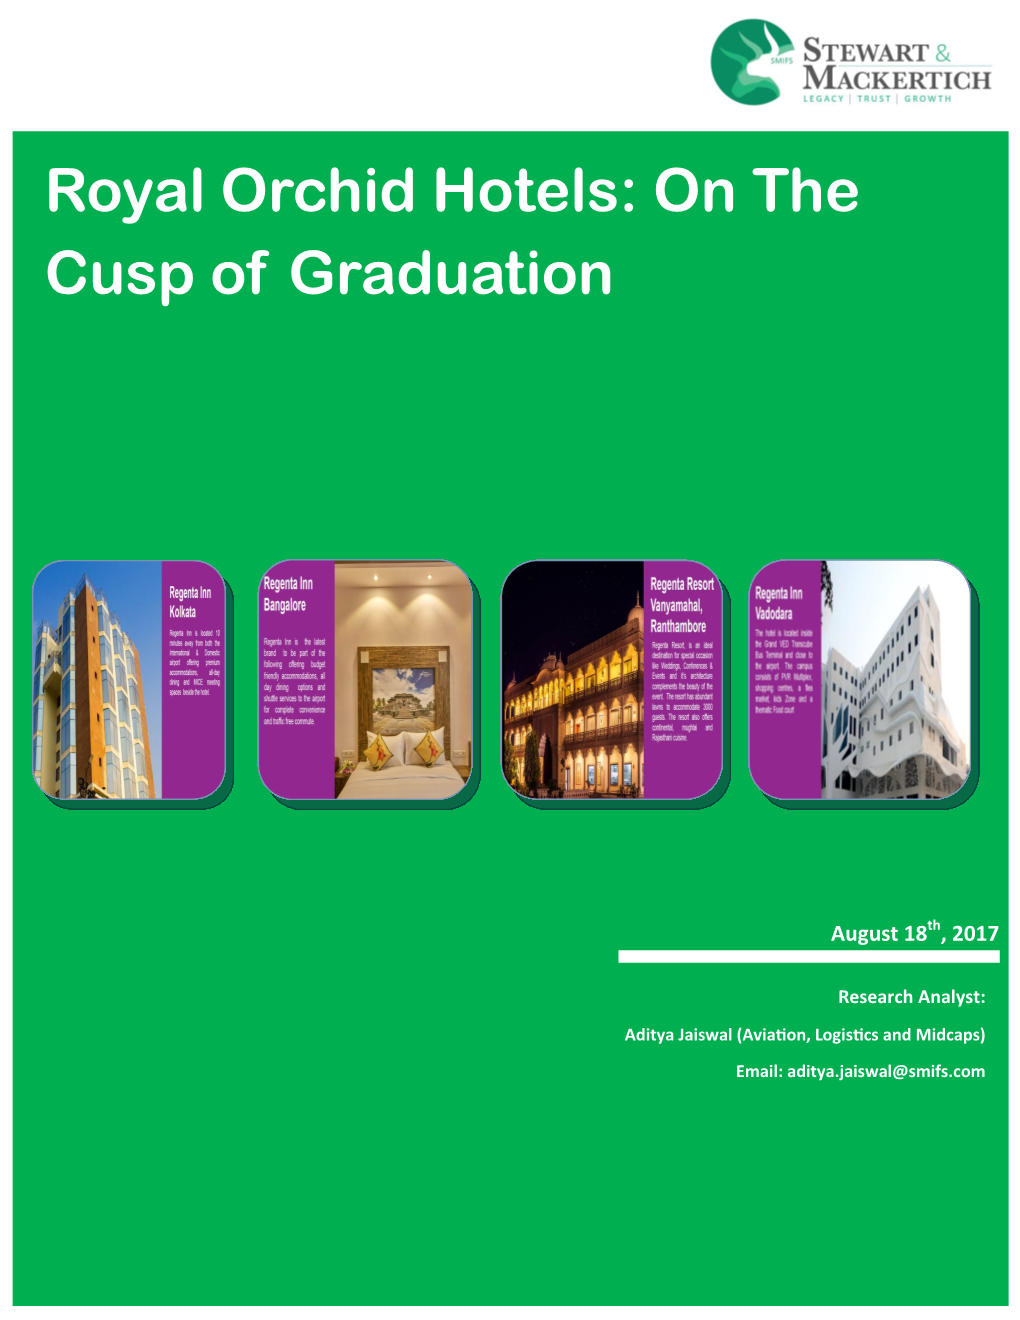 Royal Orchid Hotels: on the Cusp of Graduation